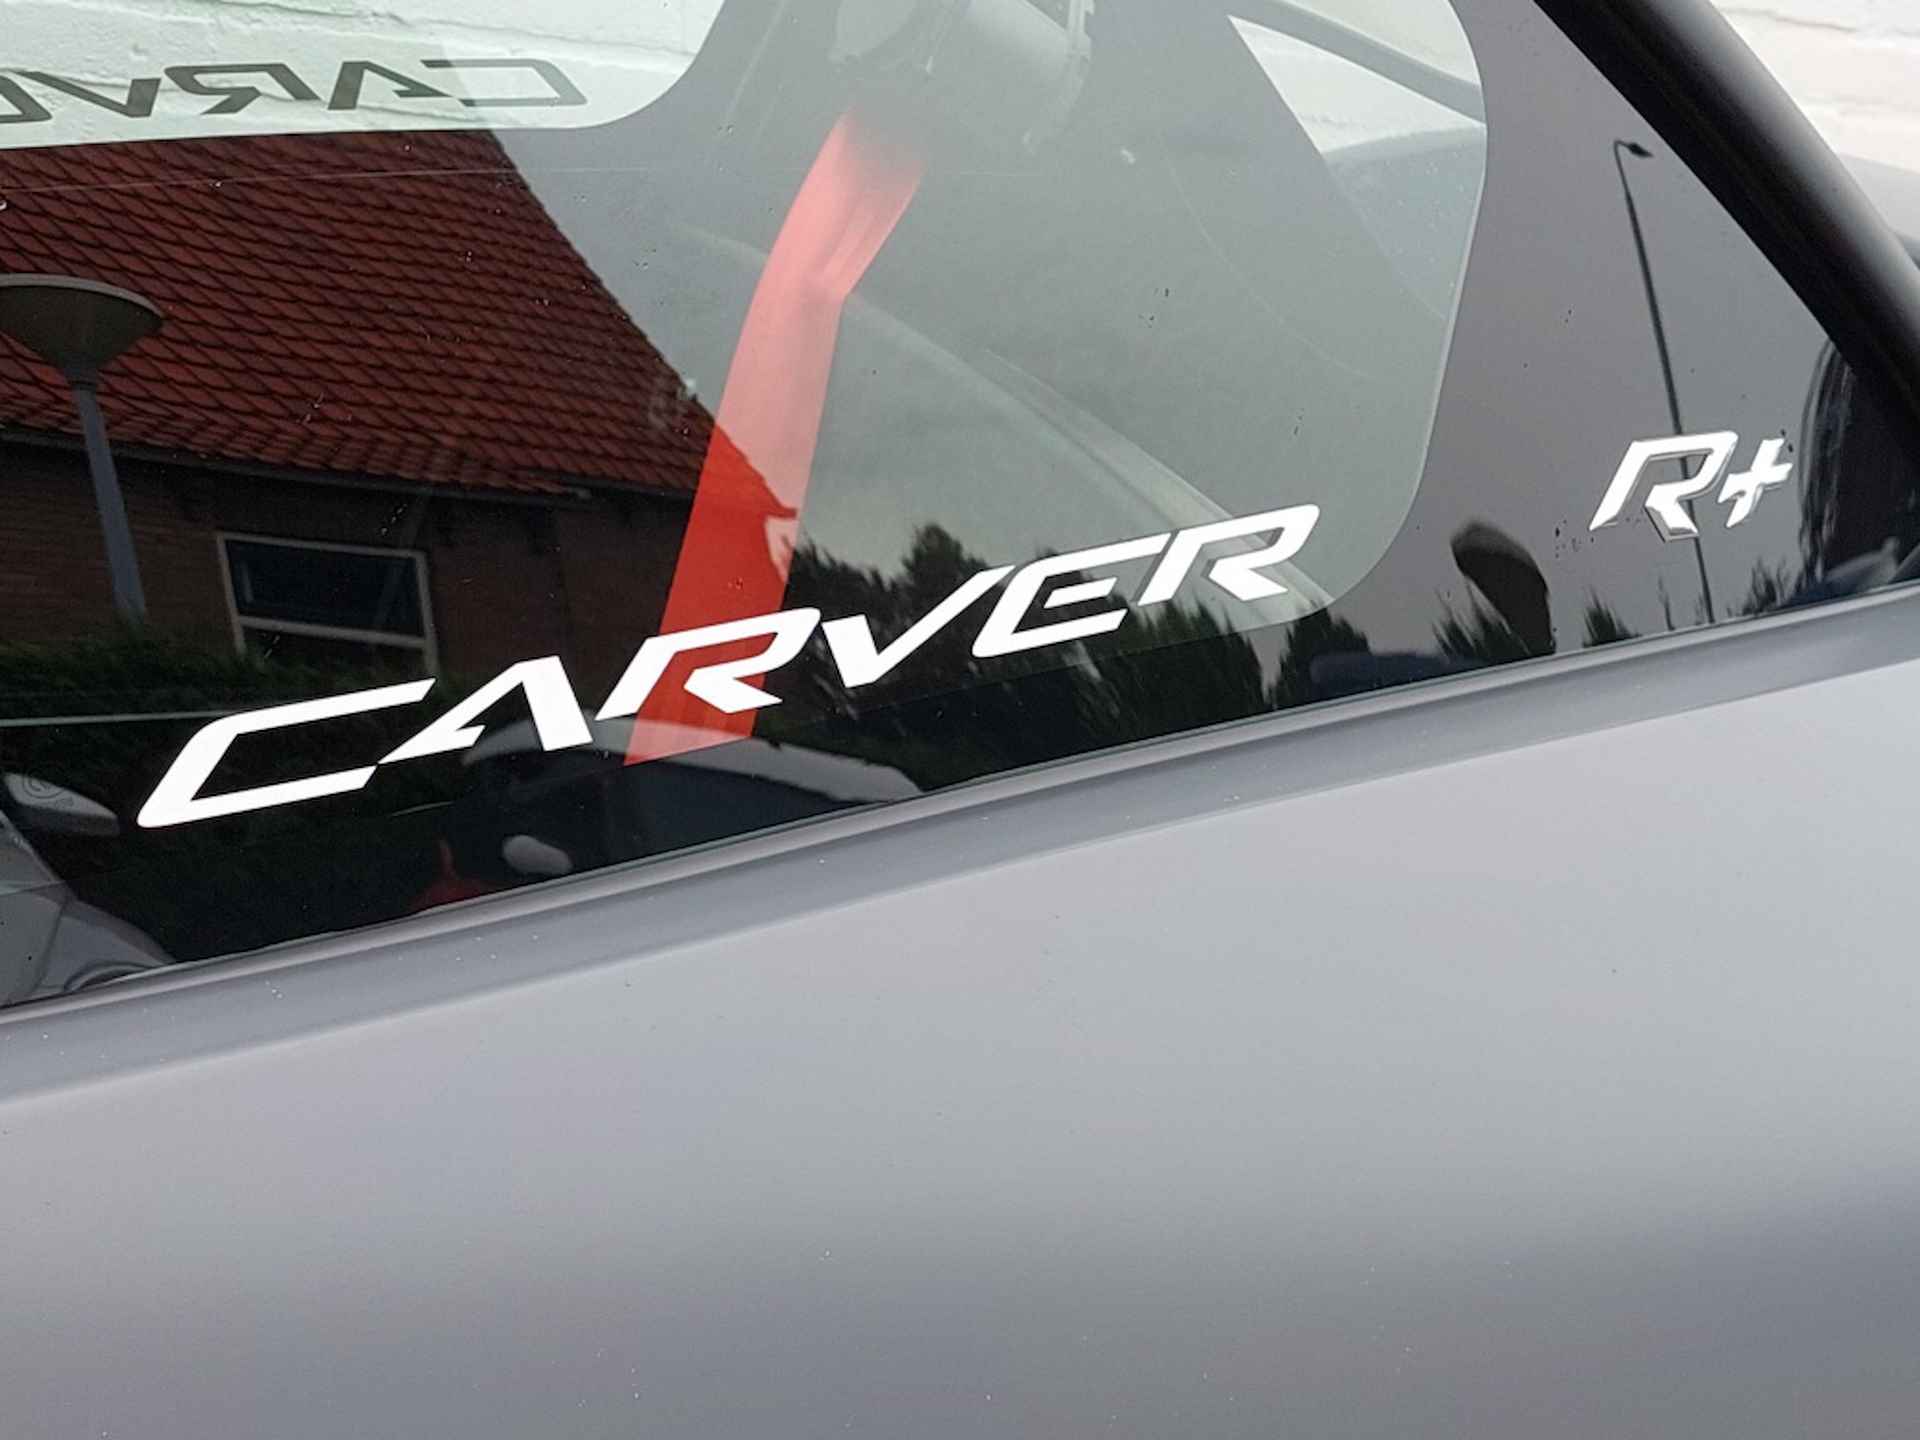 Carver R+ 7.1 kWh Active Grey - 9/17